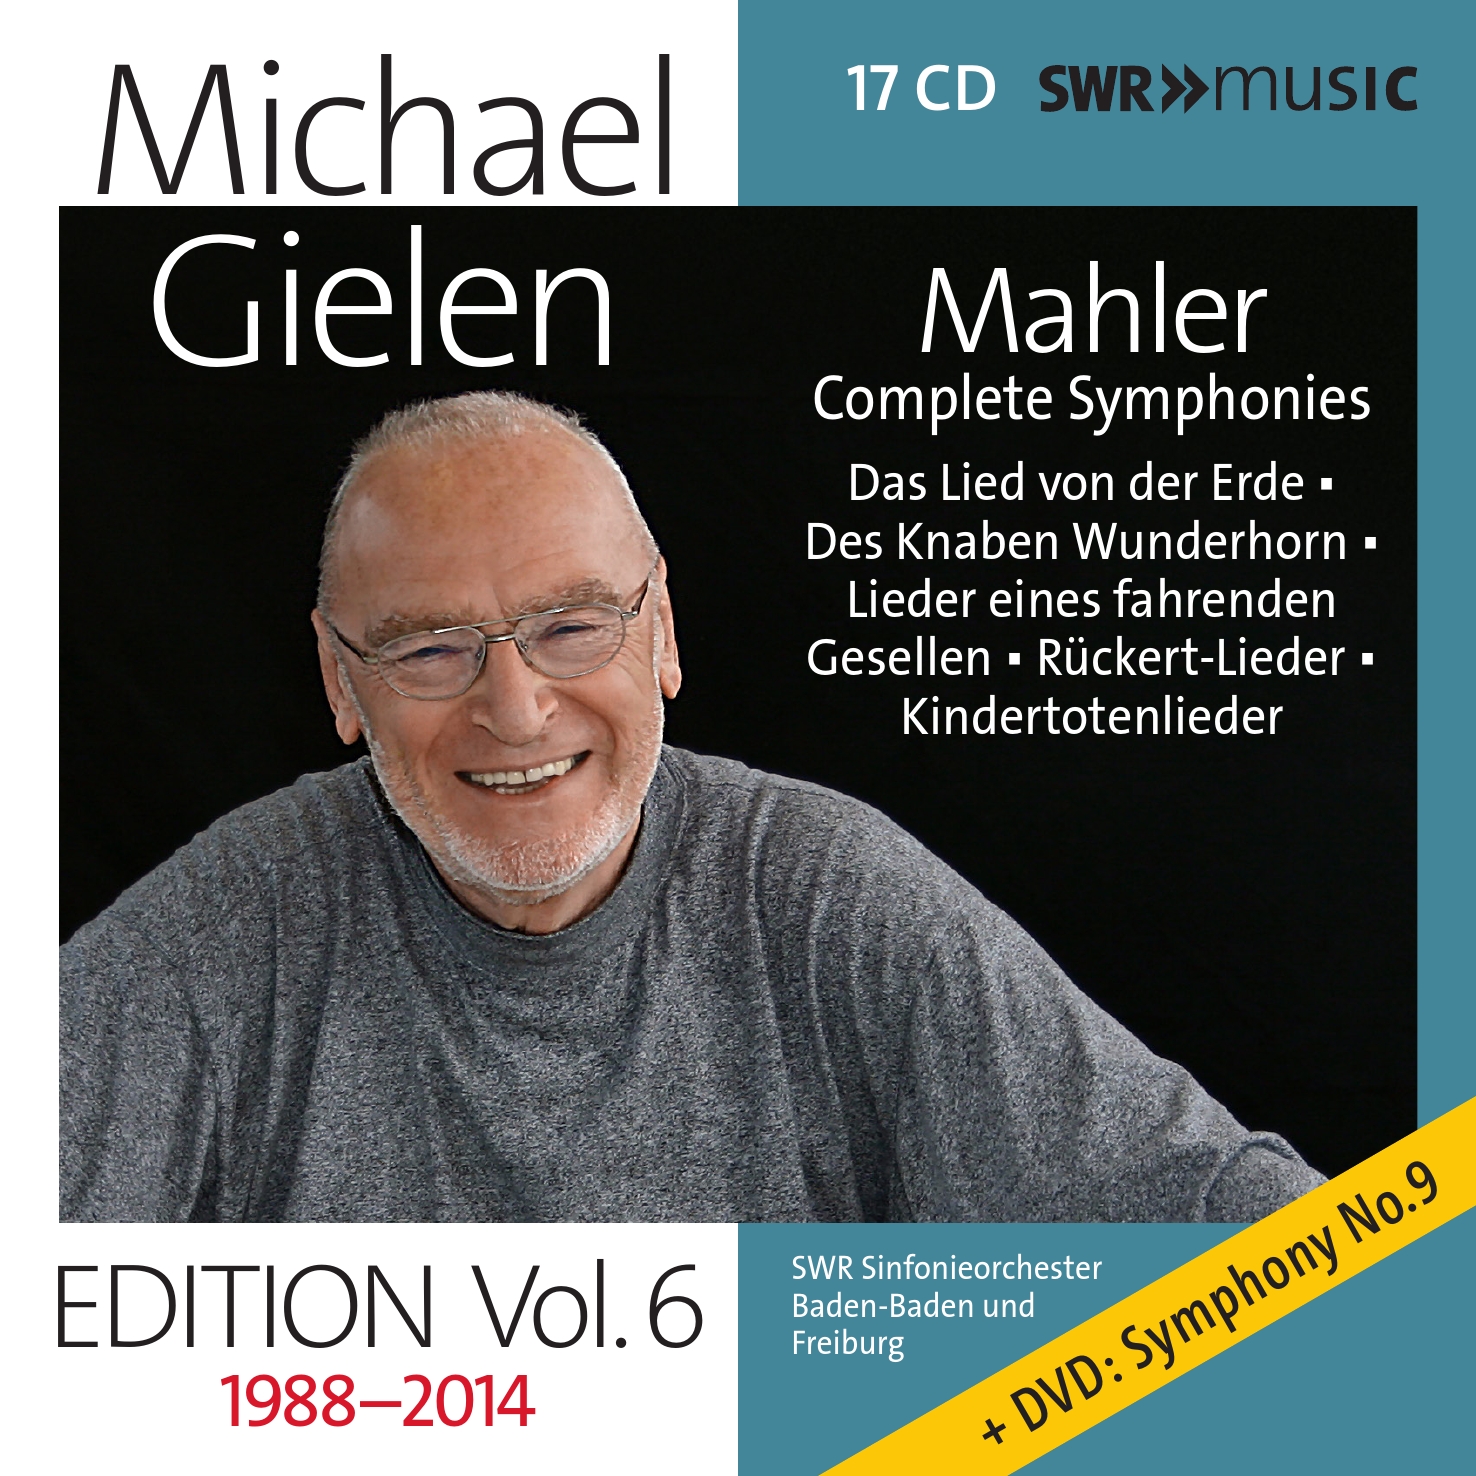 Michael Gielen Ed - Vol 6 Mahler Symphonies and. Song Cycles Recorded 1988-2014 cd12